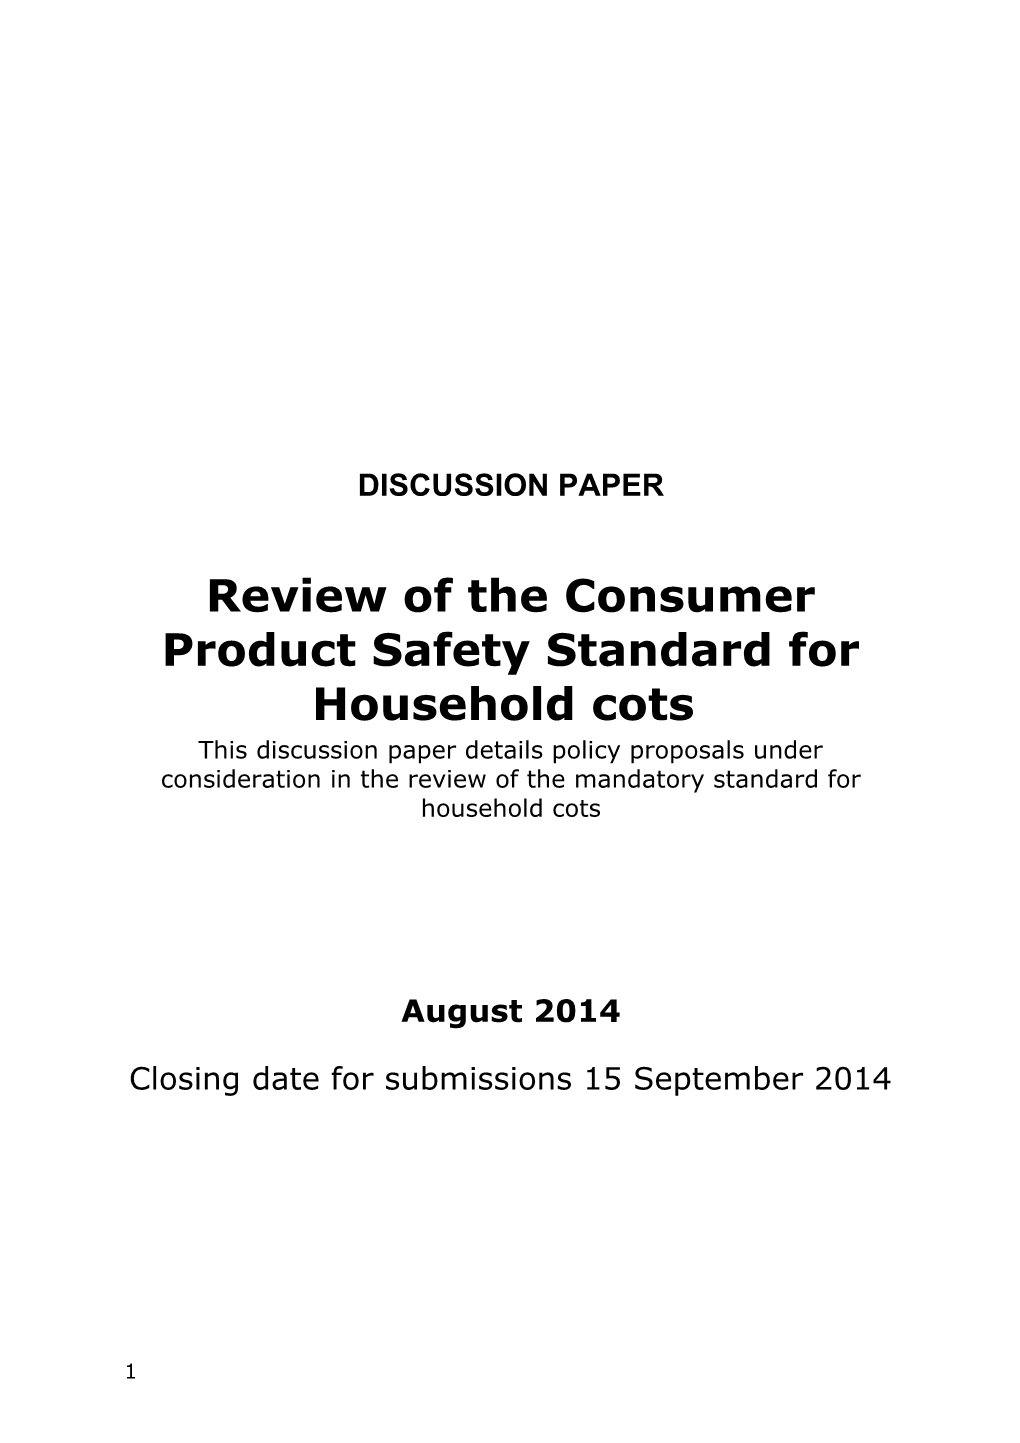 Review of the Consumer Product Safety Standard for Household Cots